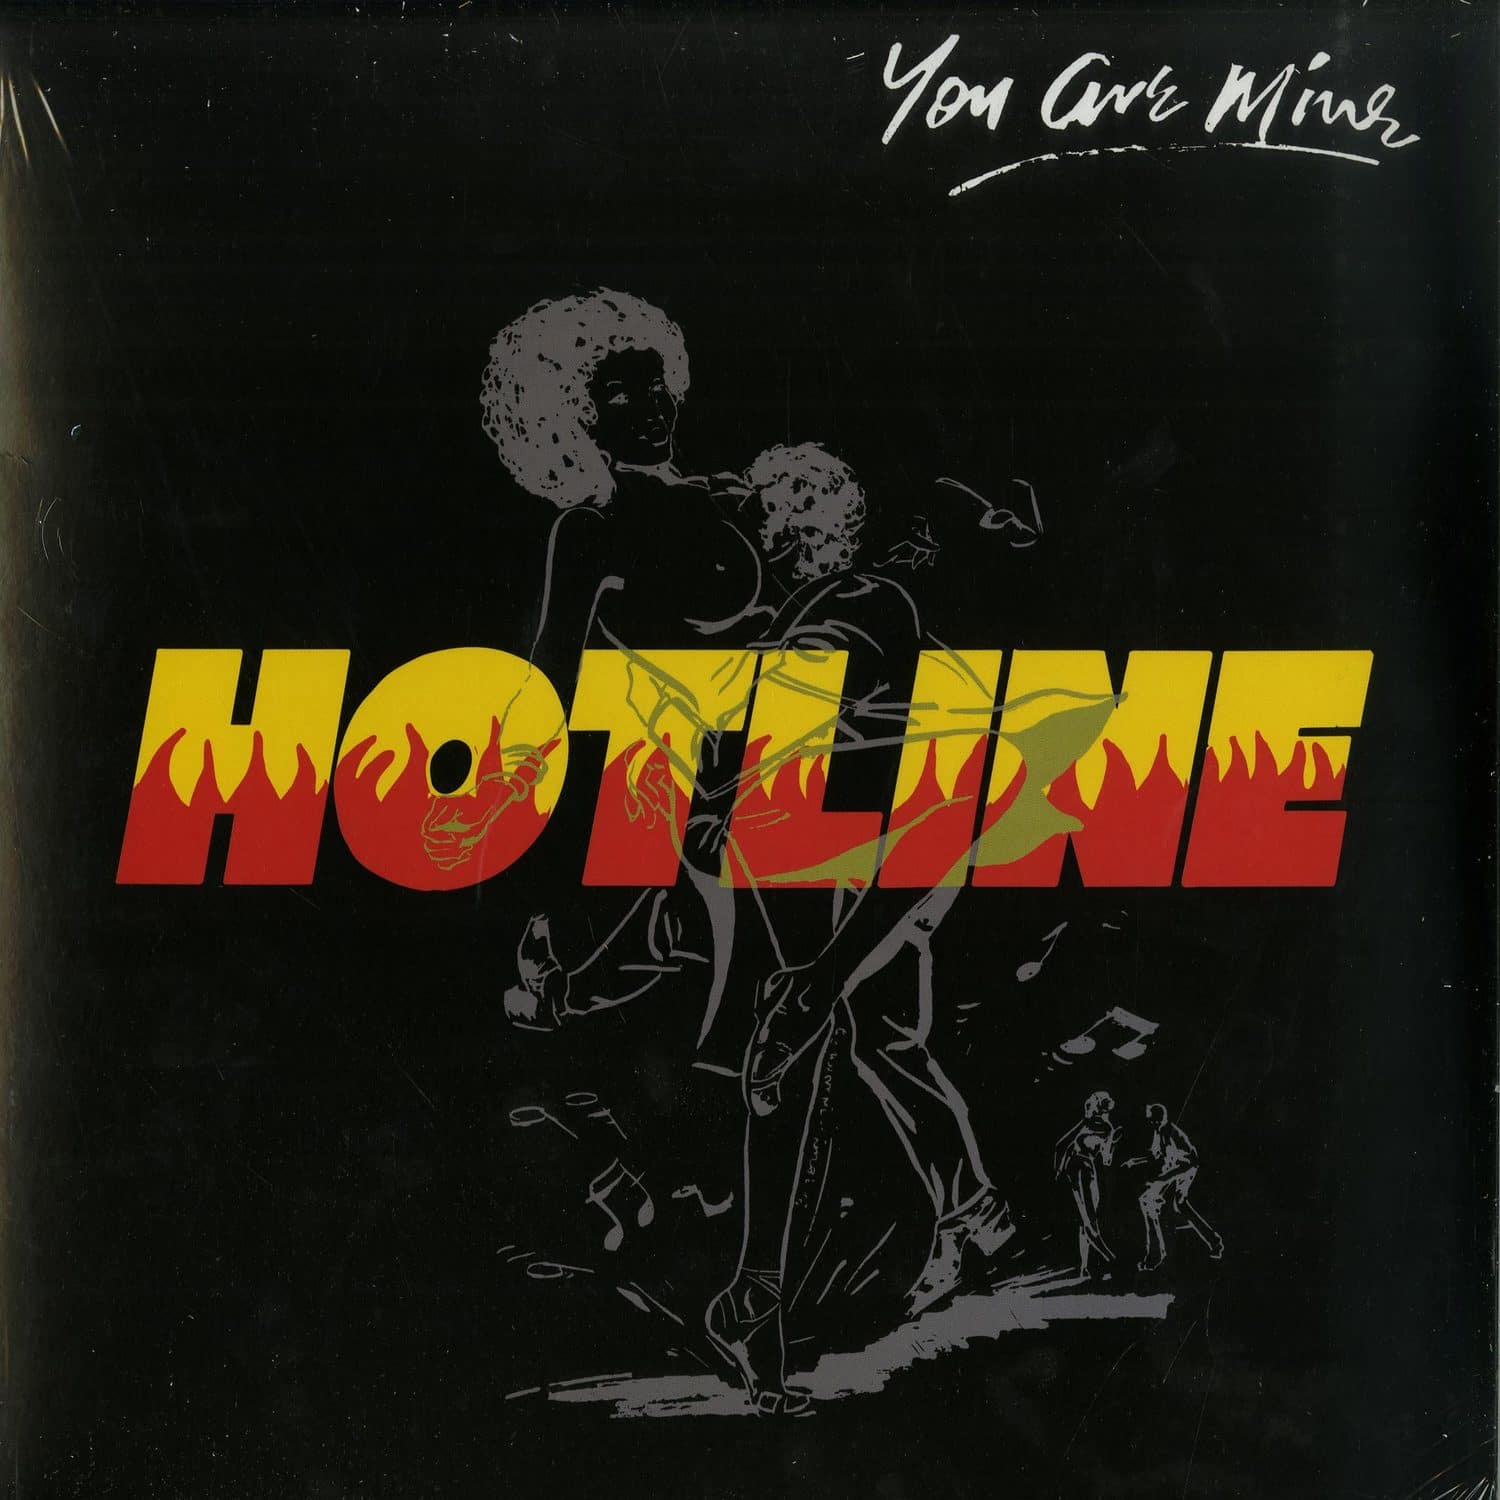 Hotline - YOU ARE MINE 